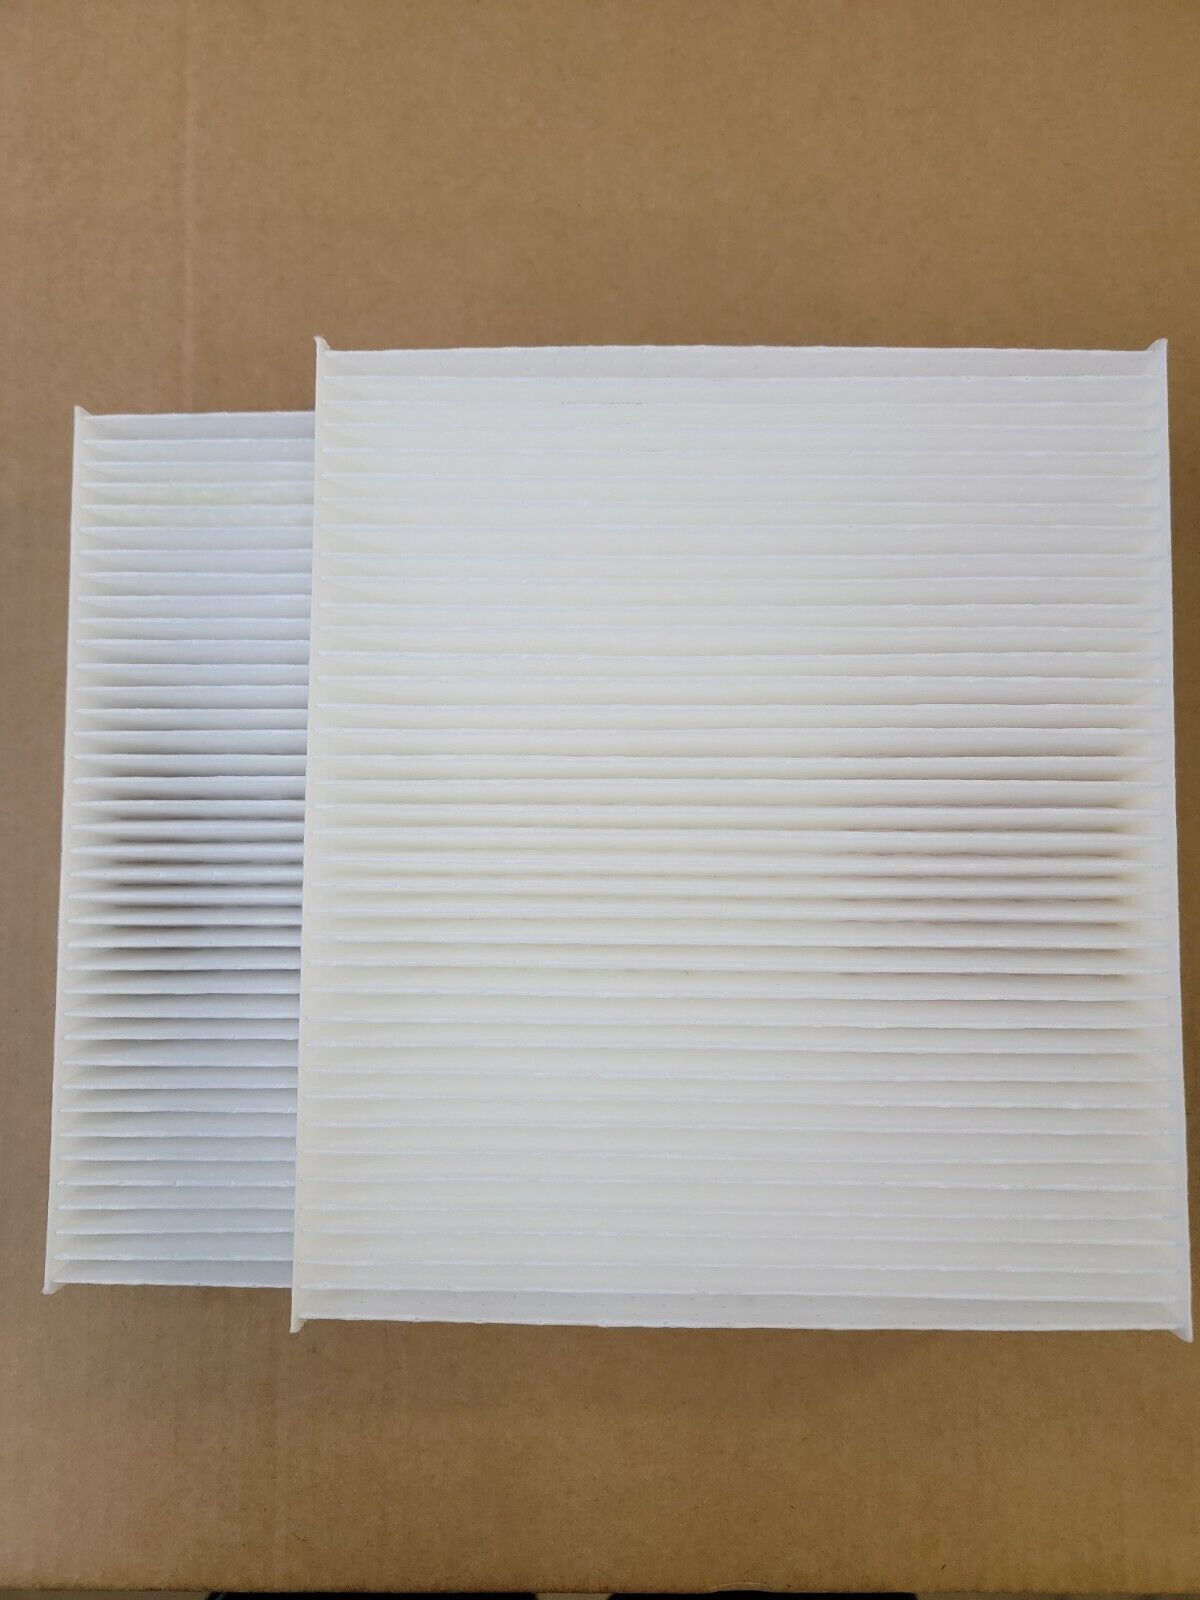 2 x Cabin Air Filter C25870 For Infinity FX50, G25, G37, M35 - See Description